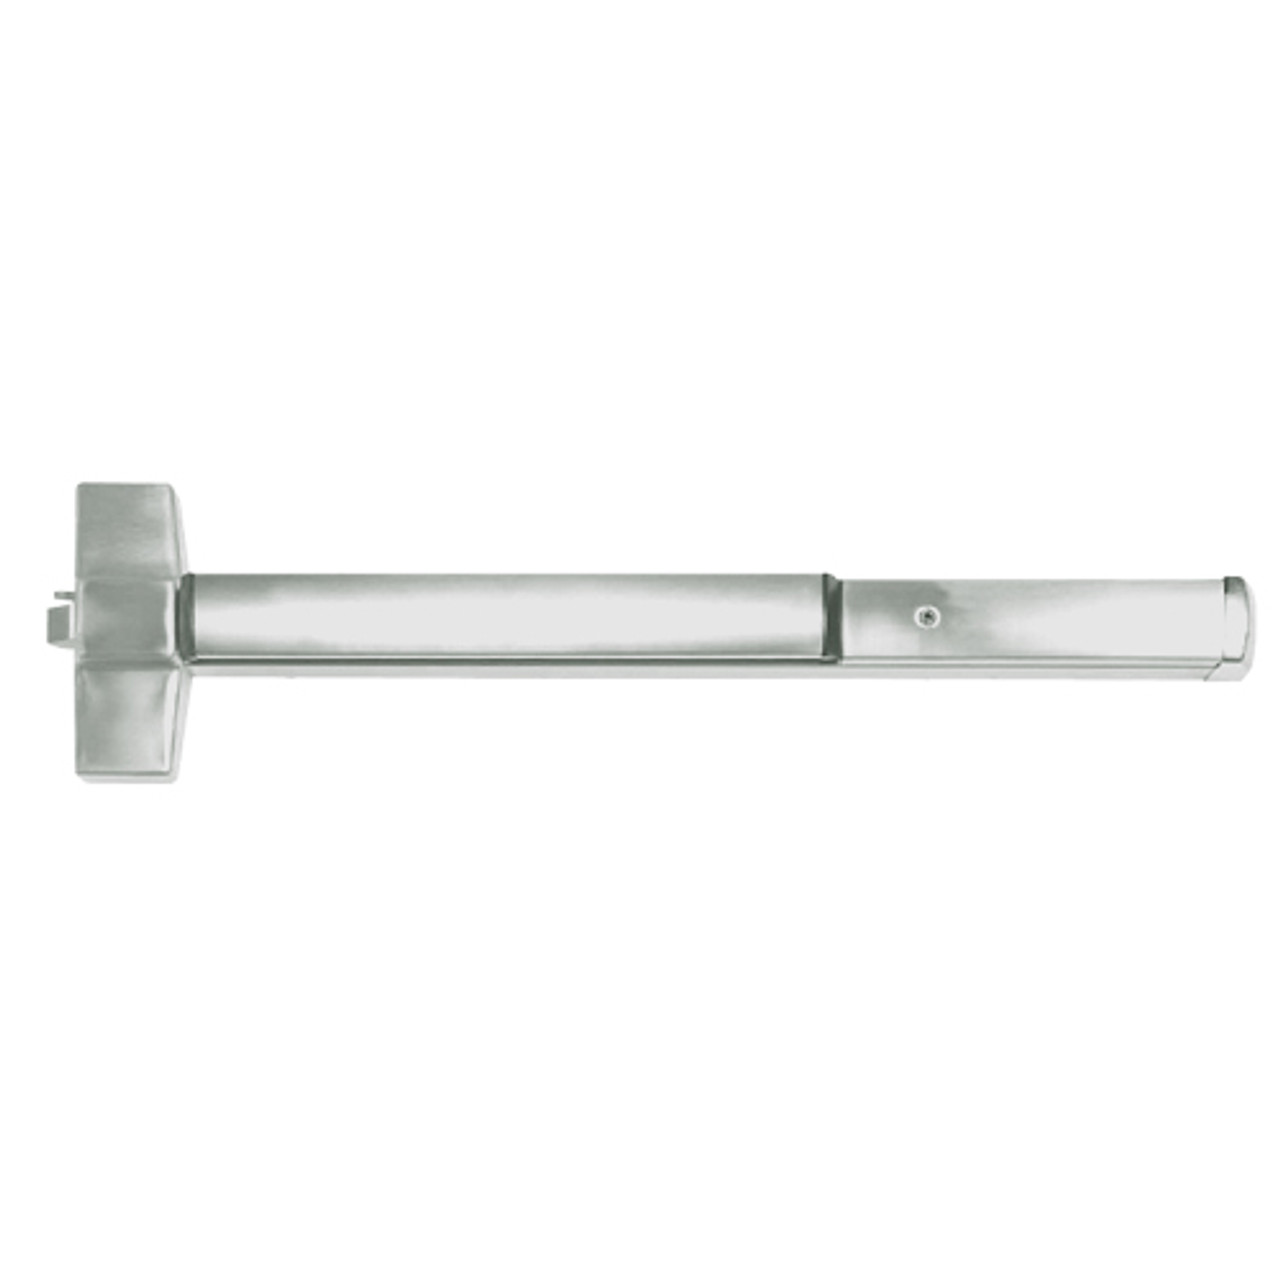 ED5200-619-W048-M52 Corbin ED5200 Series Non Fire Rated Exit Device with Cylinder Dogging in Satin Nickel Finish